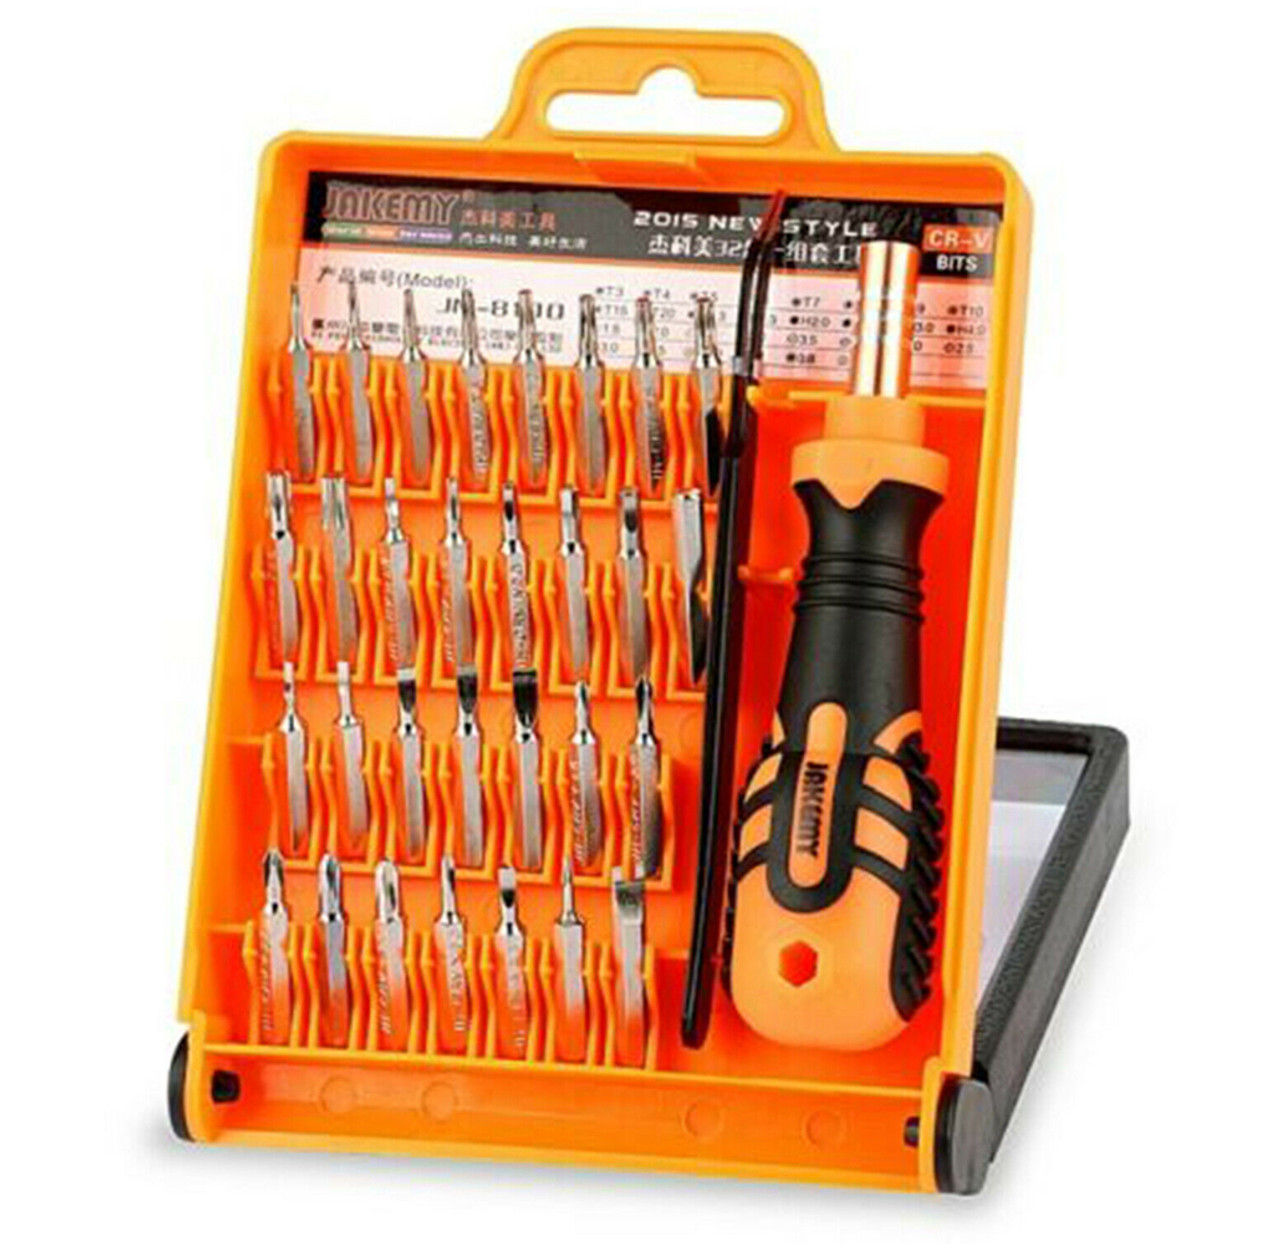 32-in-1 Professional Precision Screwdriver Set with Tweezers product image